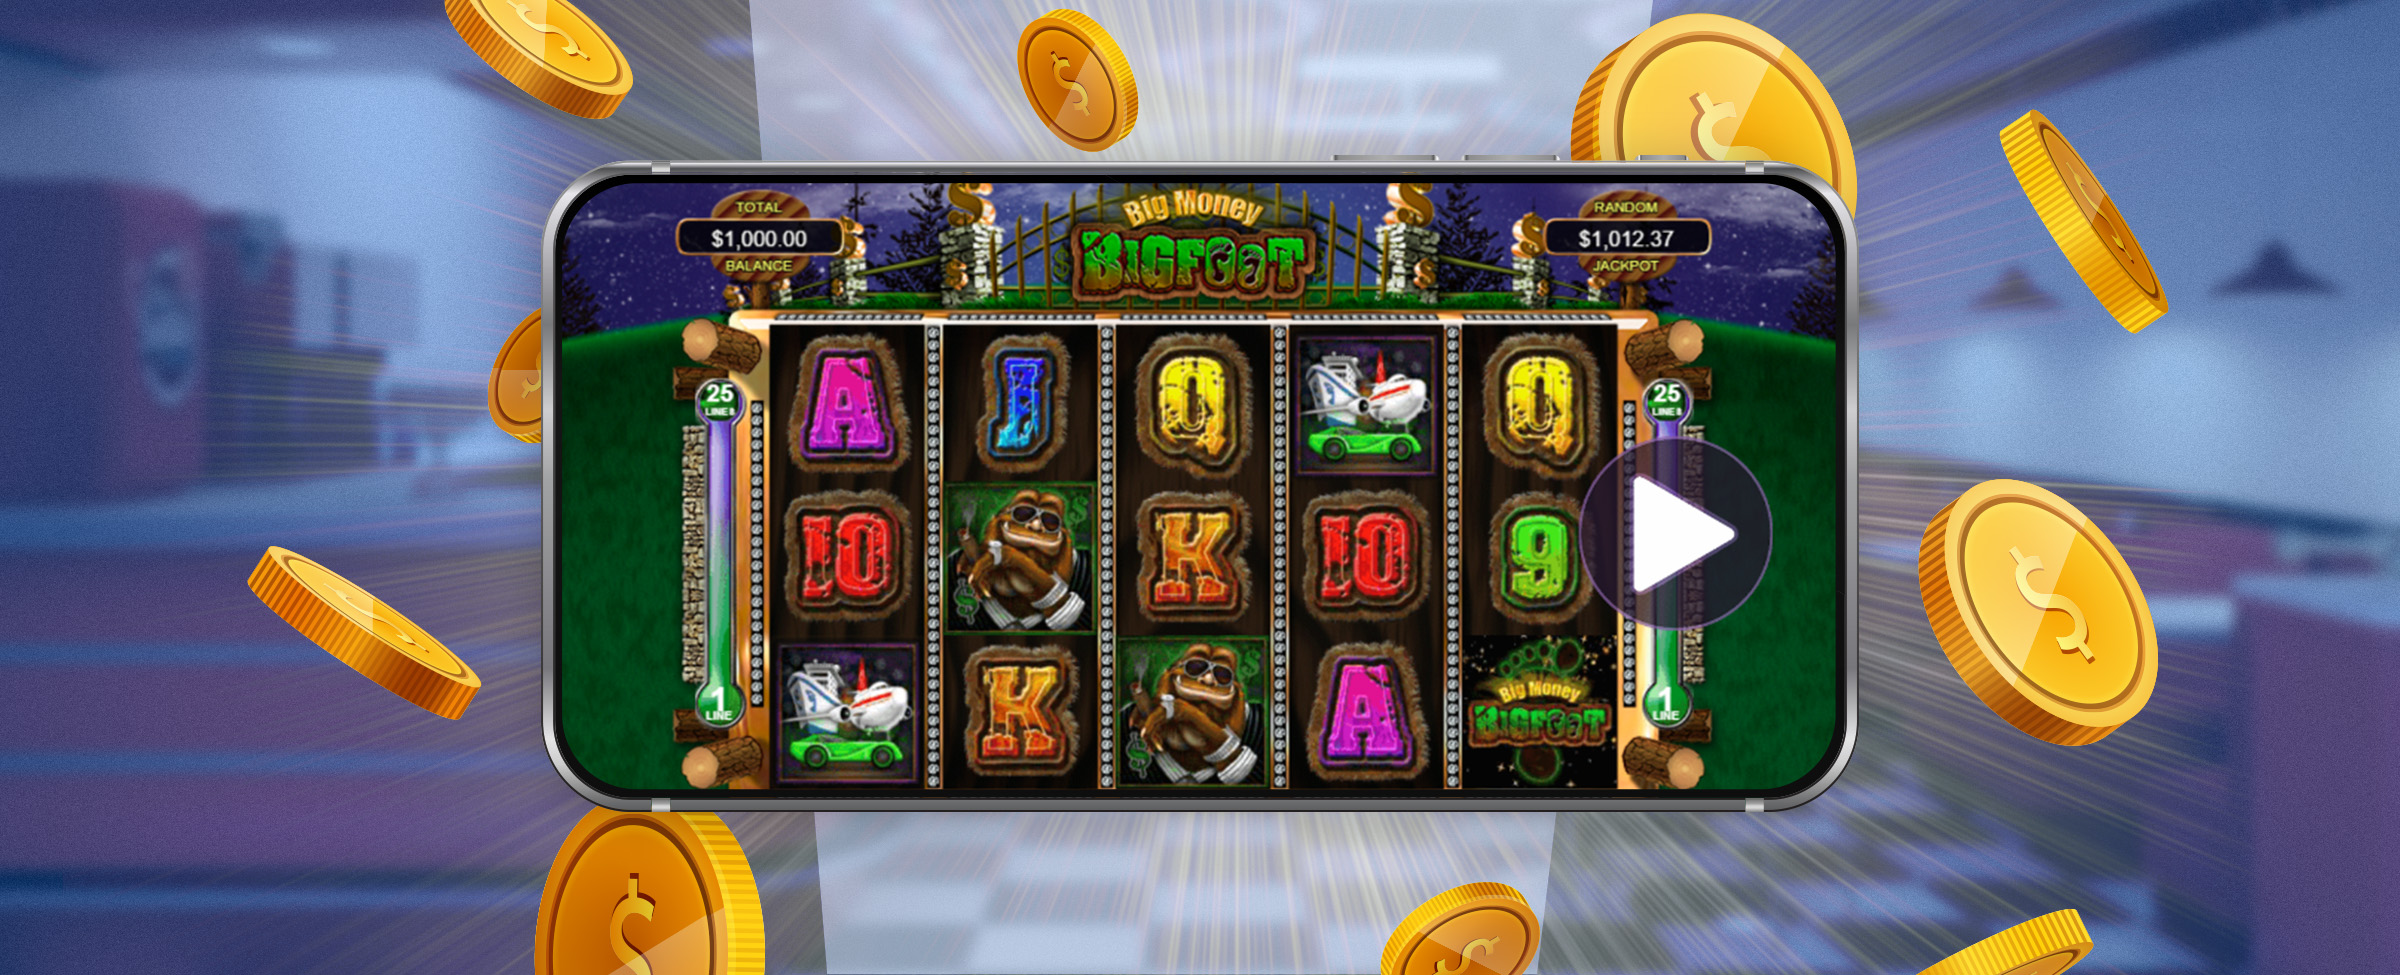 A mobile phone shows Cafe Casino’s Big Money Bigfoot slot game in action, featuring its reels and symbols, surrounded by gold coins